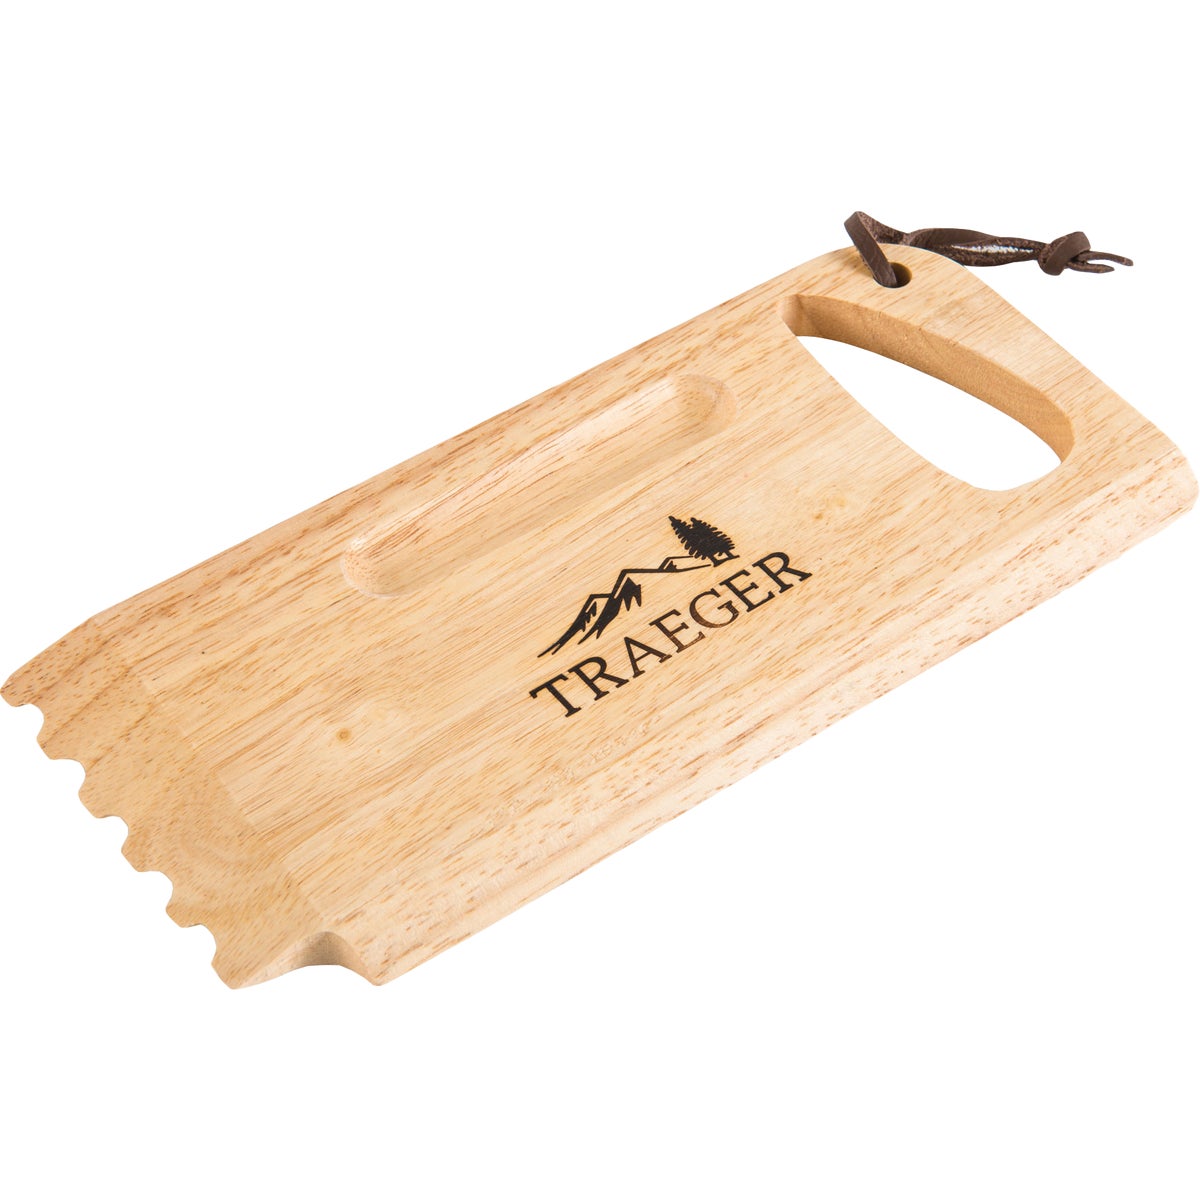 Item 895233, Wooden grill scraper that cleans grill grates easily and effectively.